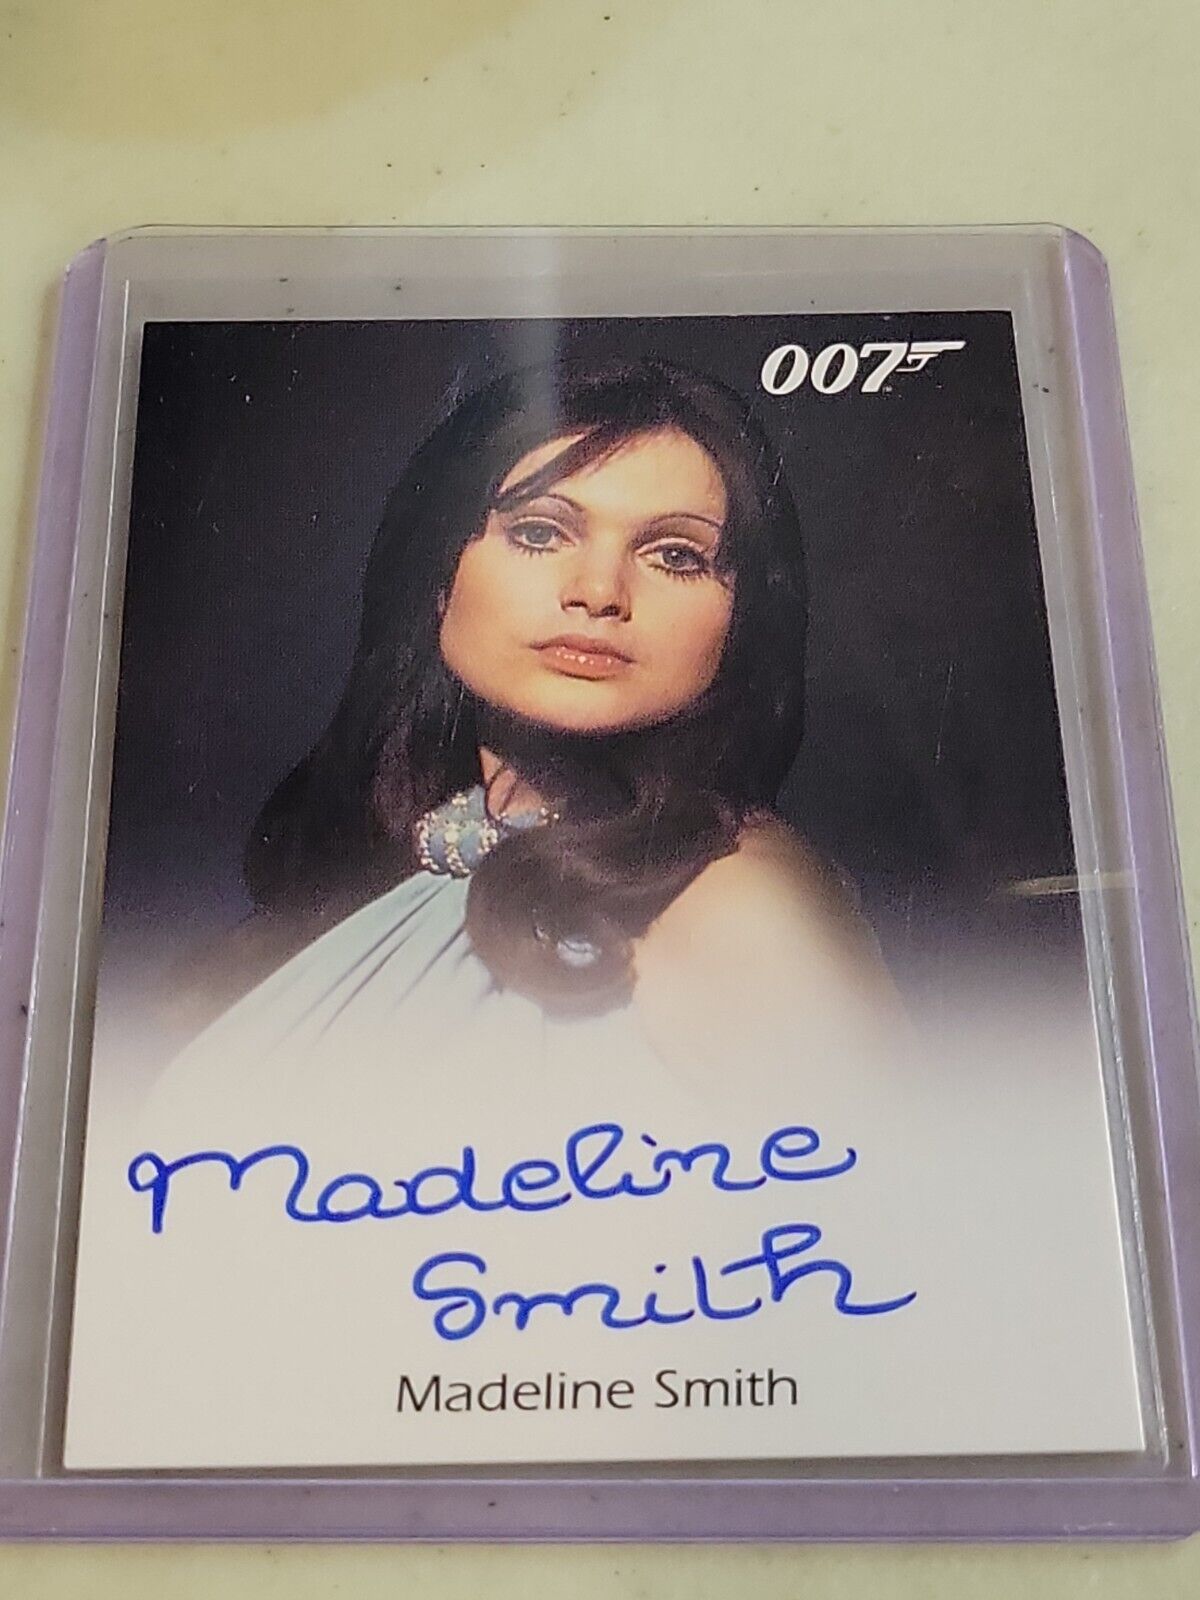 2016 James Bond Classics Live And Let Die MADELINE SMITH Full Bleed Autograph 